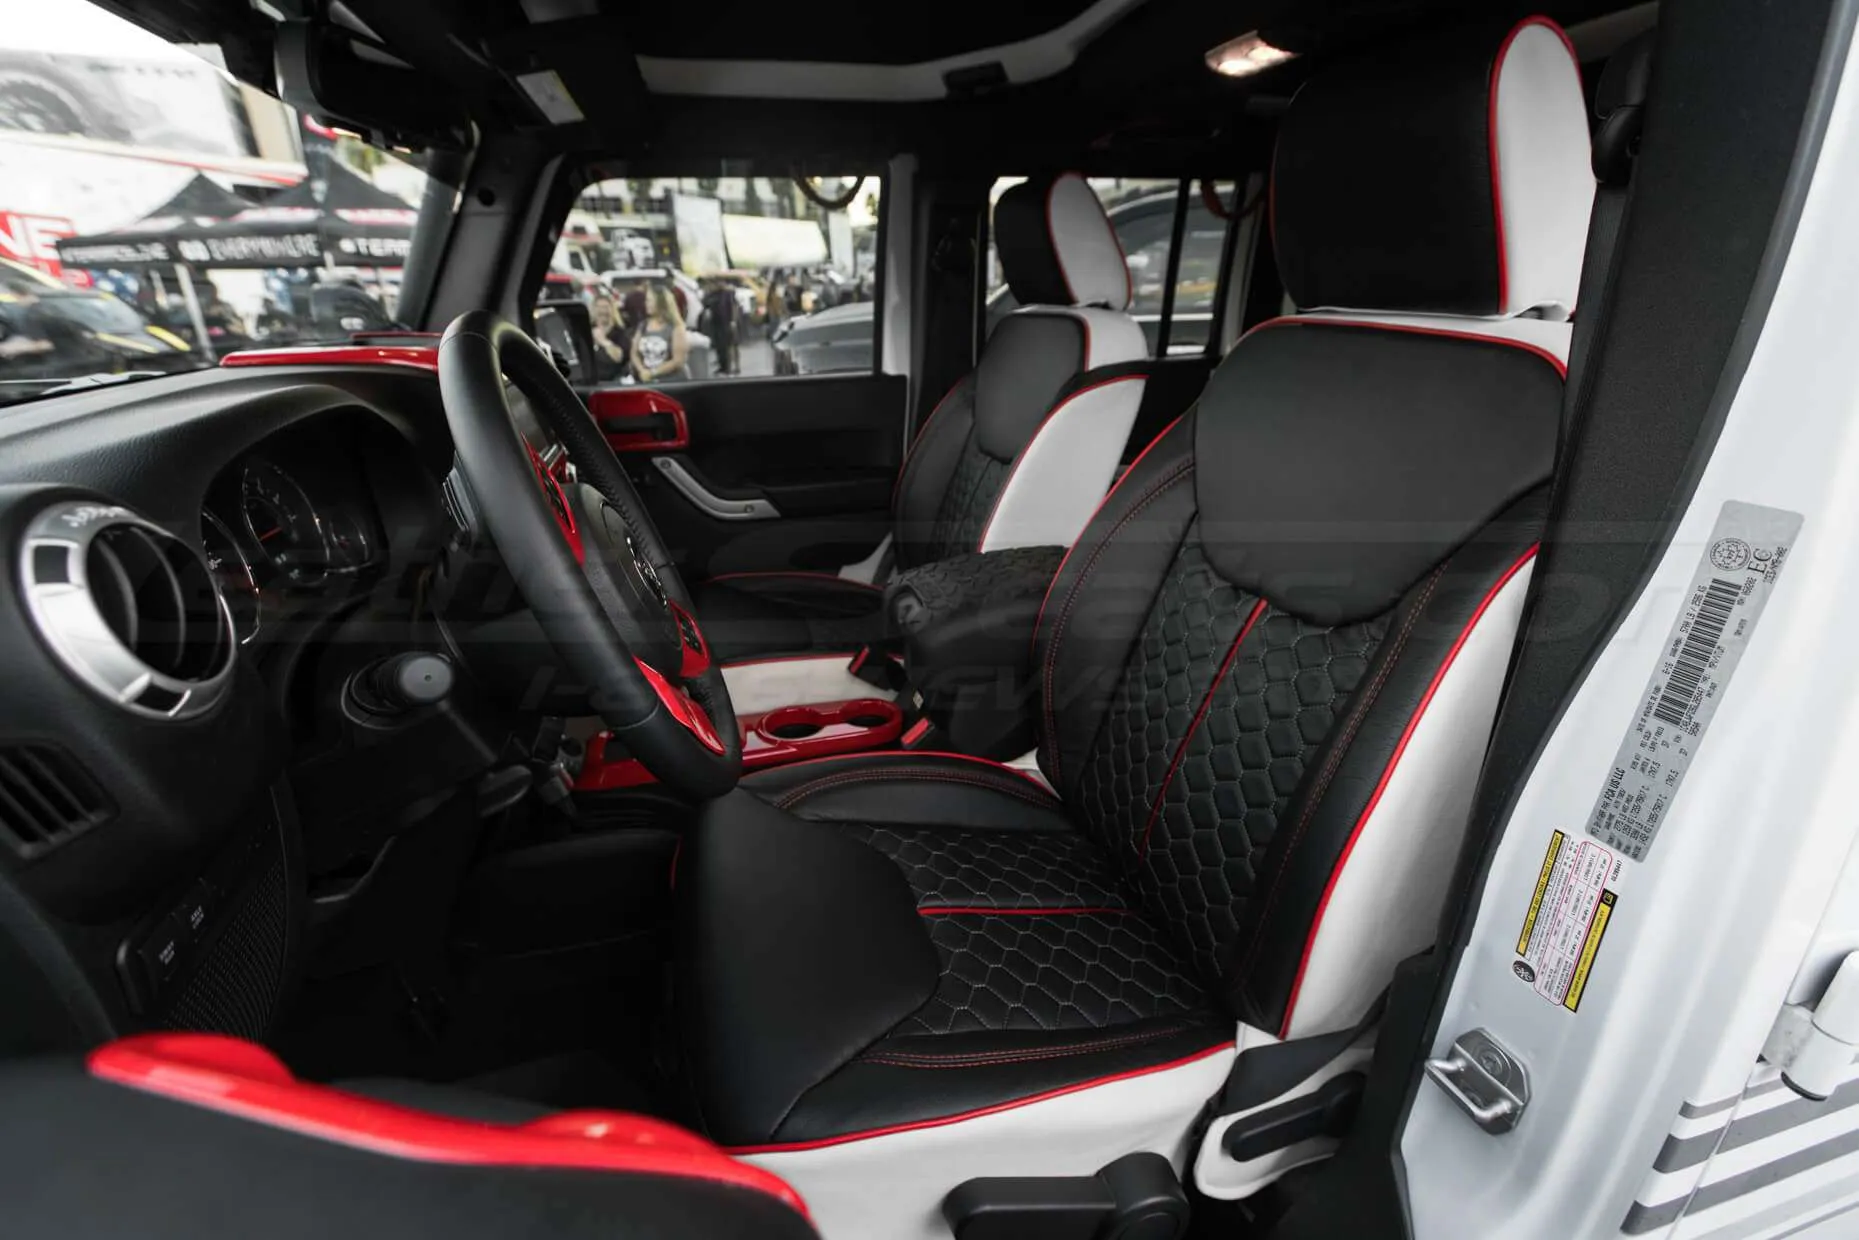 2013-2018 Jeep Wrangler Reticulated Hex installed Upholstery Kit - White/Black/Bright Red - Front interior from drivers side